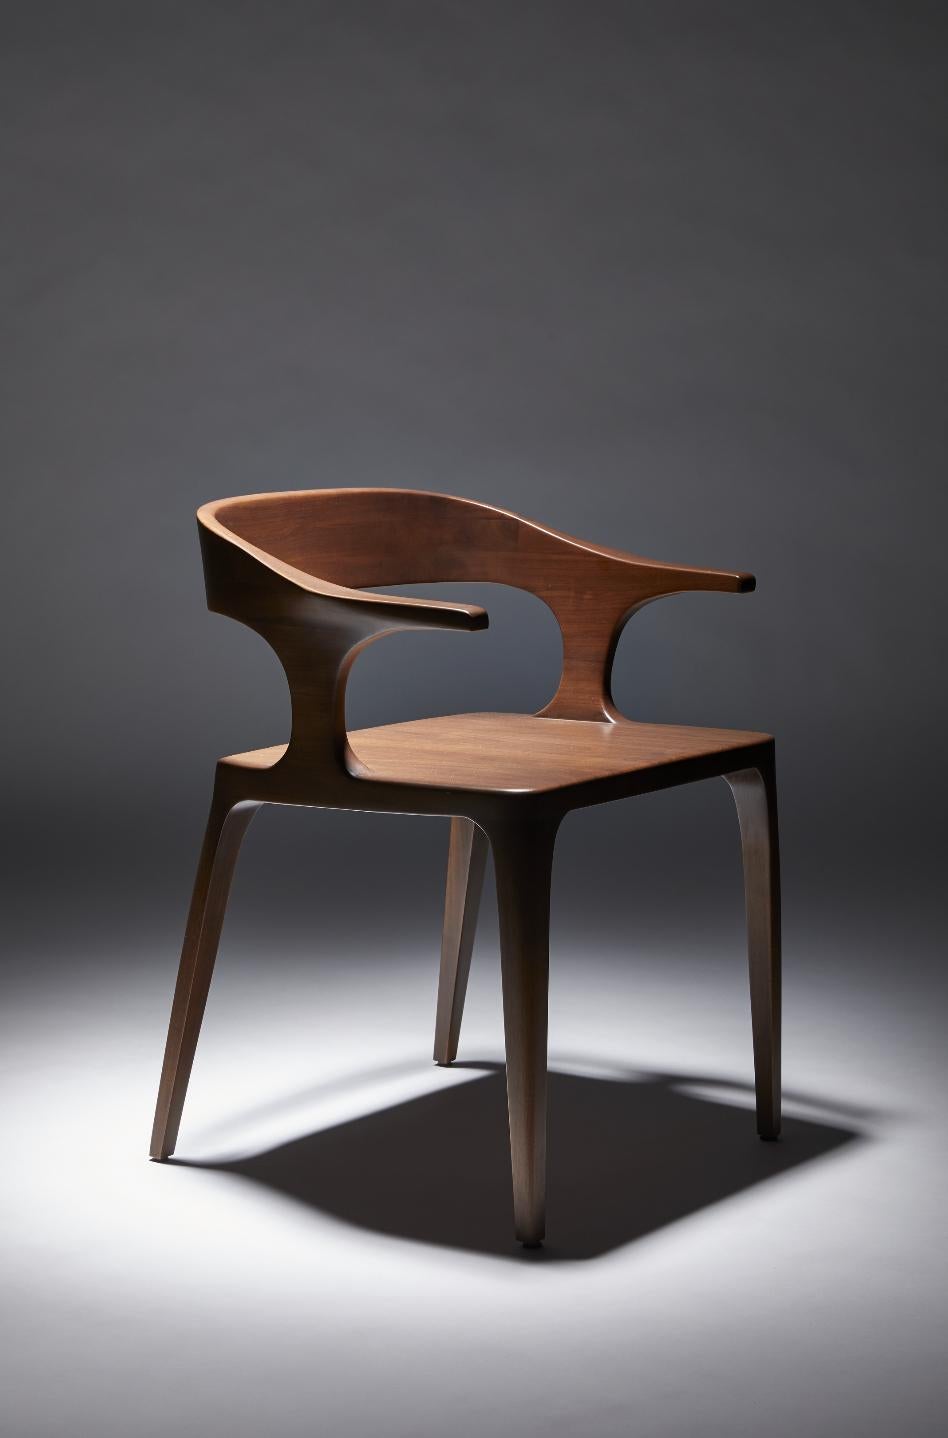 Confortable dining chair. In Walnut but can be ordered in Oak or Blackened Oak wood. Oil finish

If fineness had to be incarnated by one object, without hesitation the Eileen
Chair would be it. A particular base, with a disturbing sensuality.